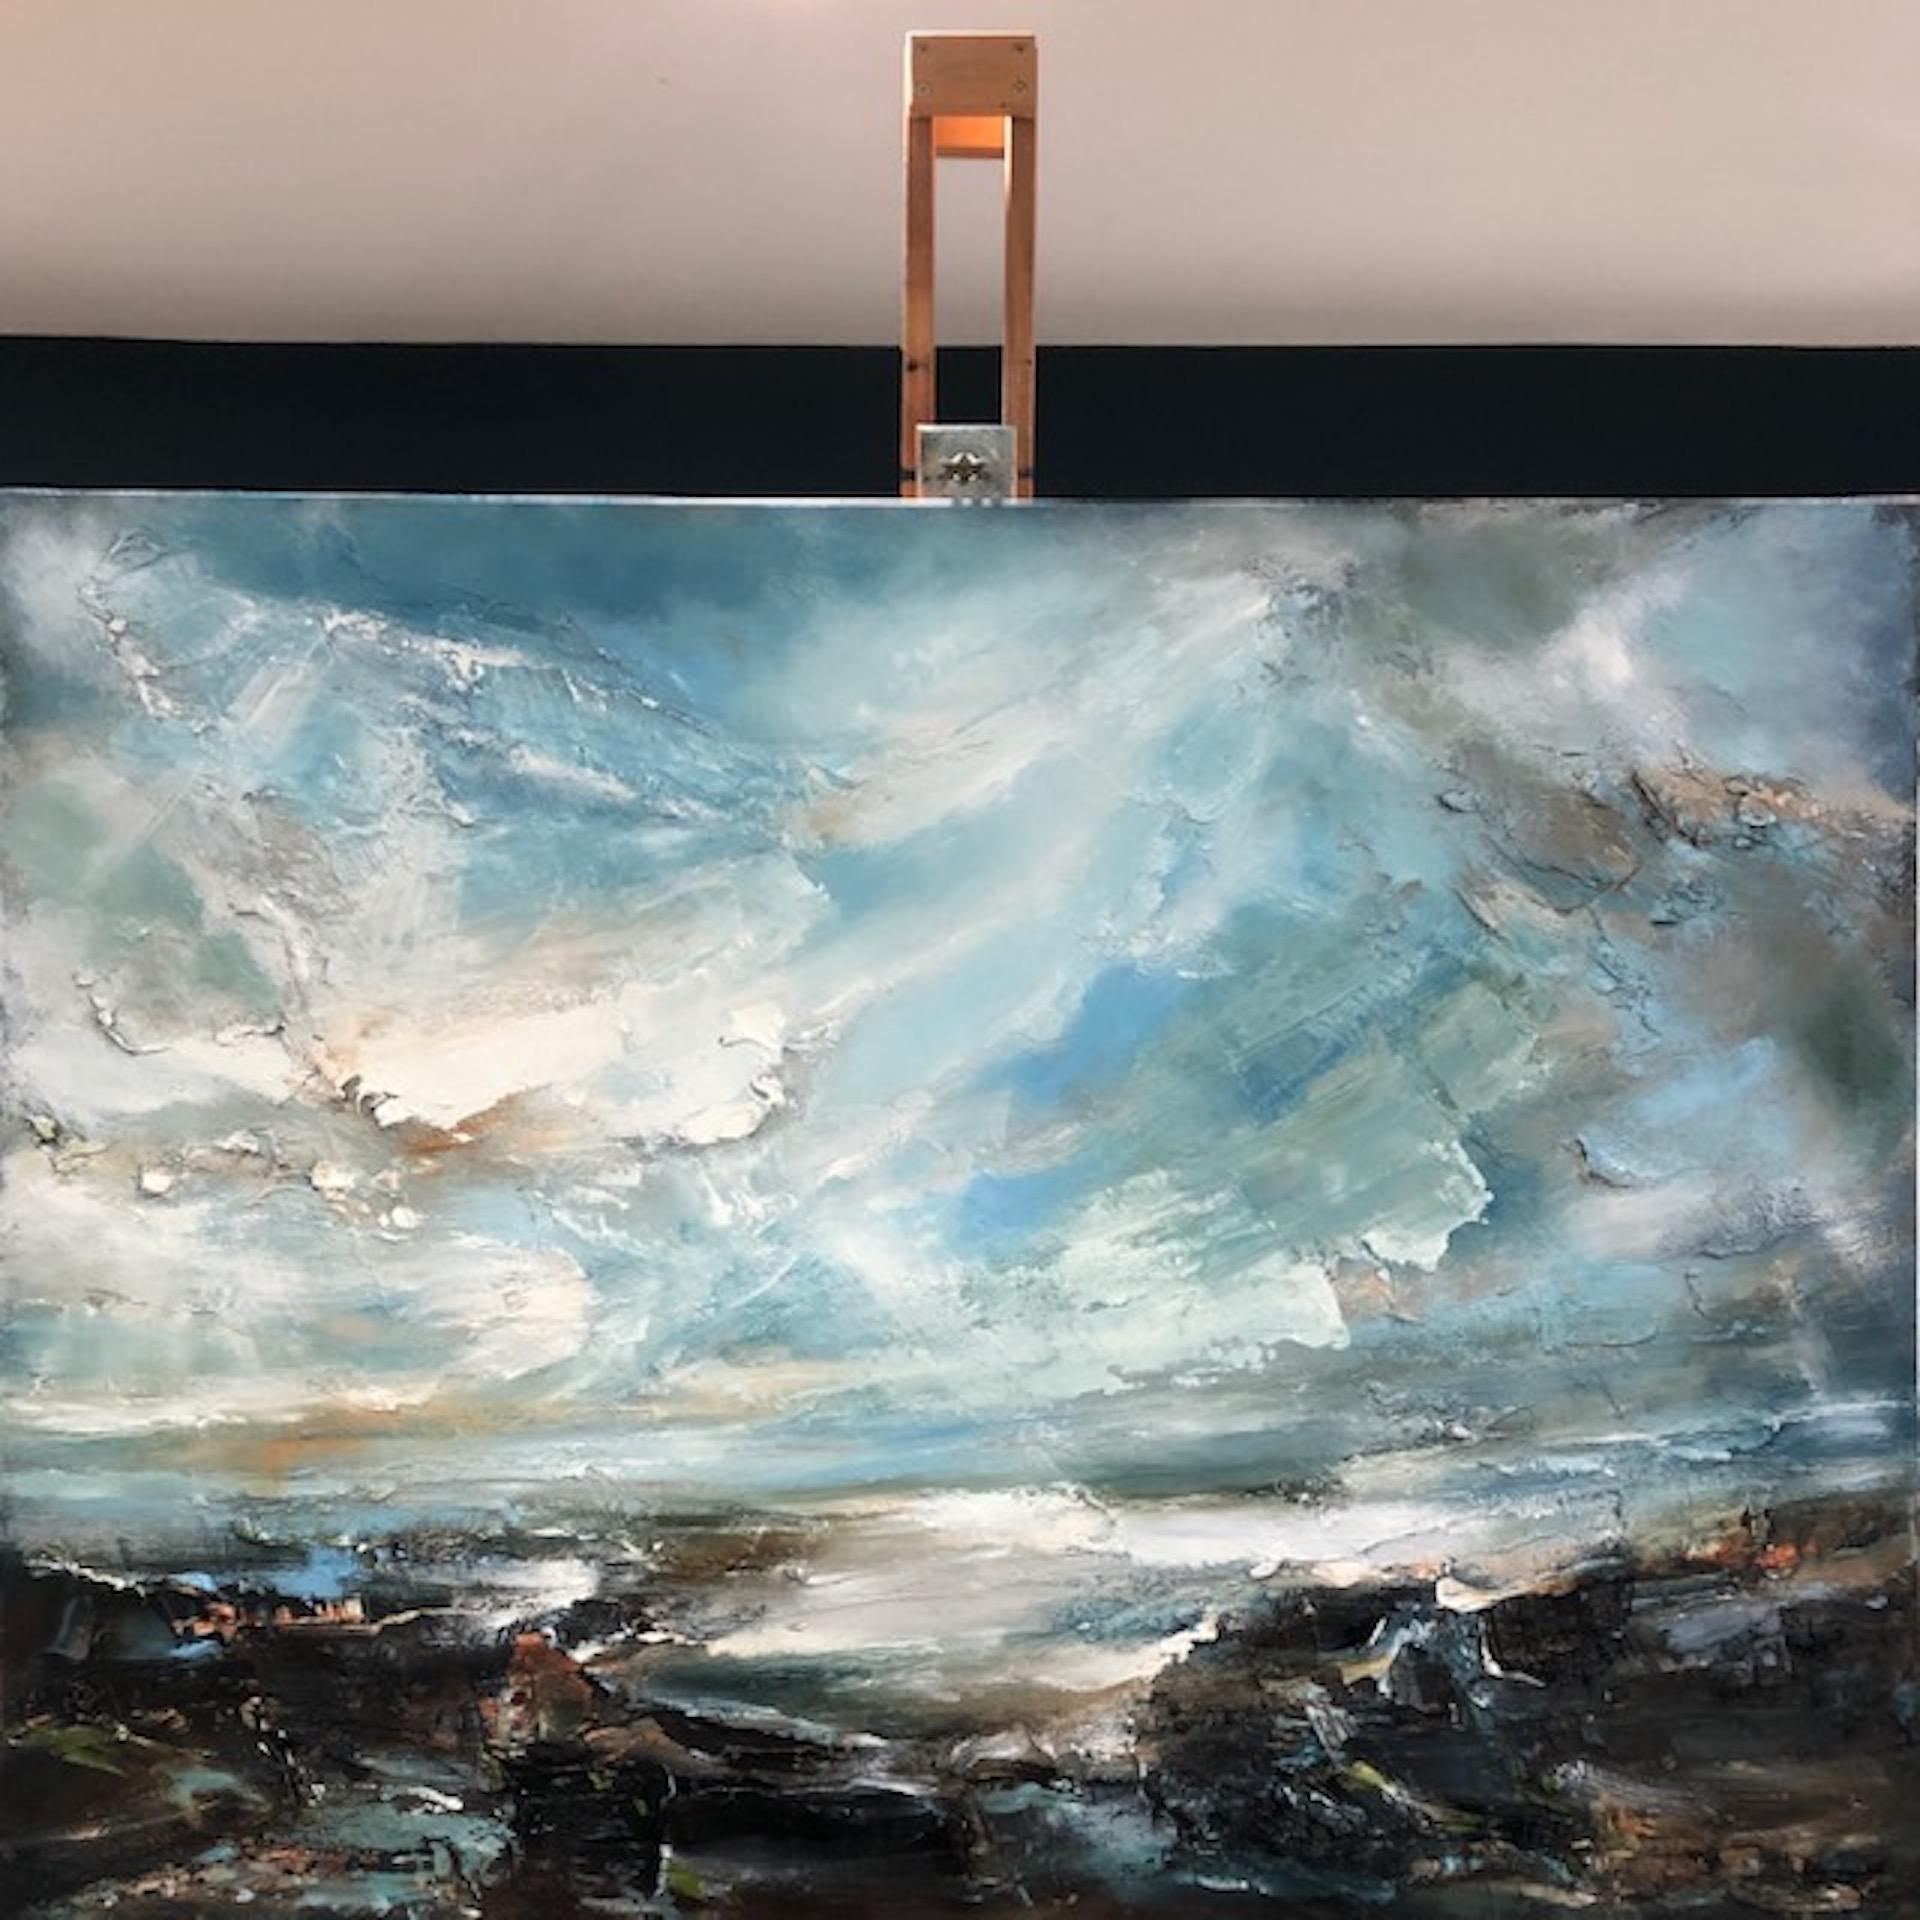 Helen Howells
Light across the Estuary
Original Oil Painting on Canvas
Oil Paint on Canvas
Canvas size: H 76 cm x W 102 cm x D 3.5cm
Sold – Unframed

(Please note that in situ images are purely an indication of how a piece may look)

Light across